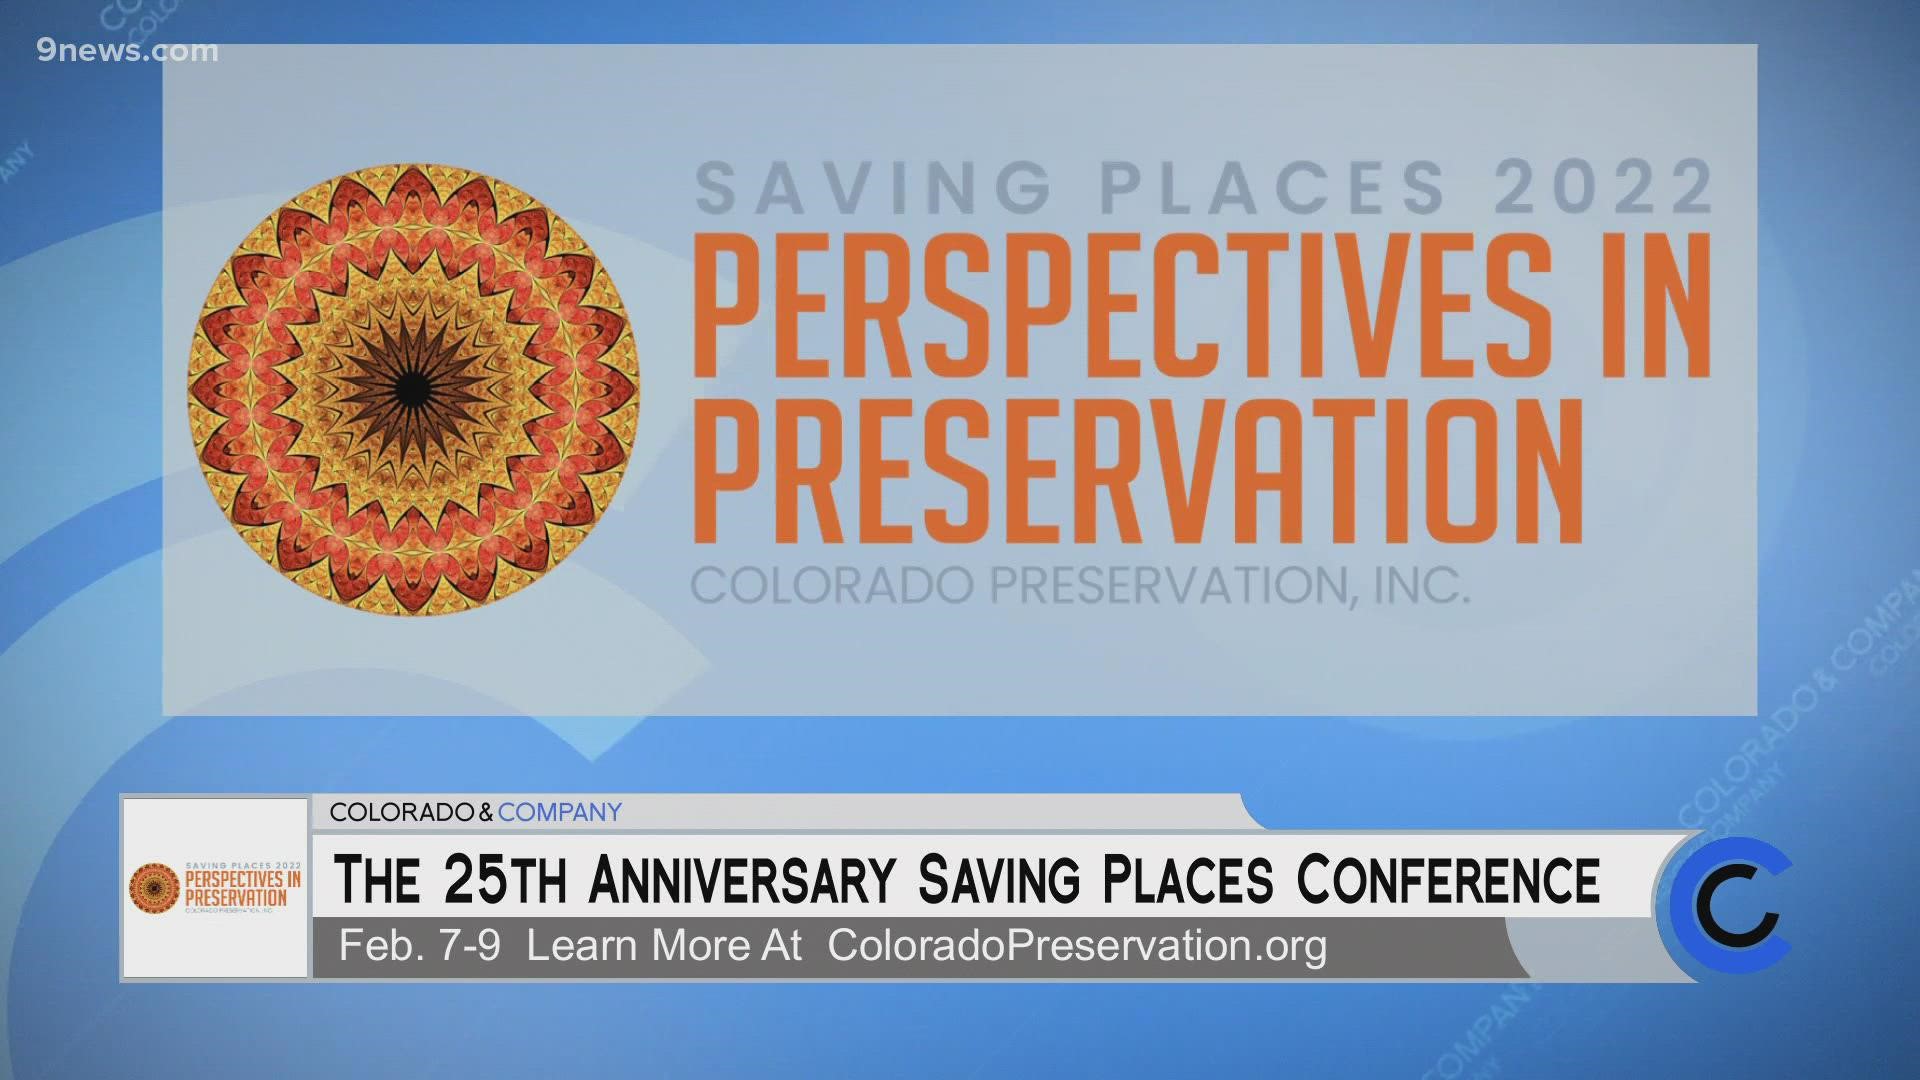 Register now for the Saving Places Conference that takes place from February 7th to 9th. Learn more and get started at ColoradoPreservationInc.org.